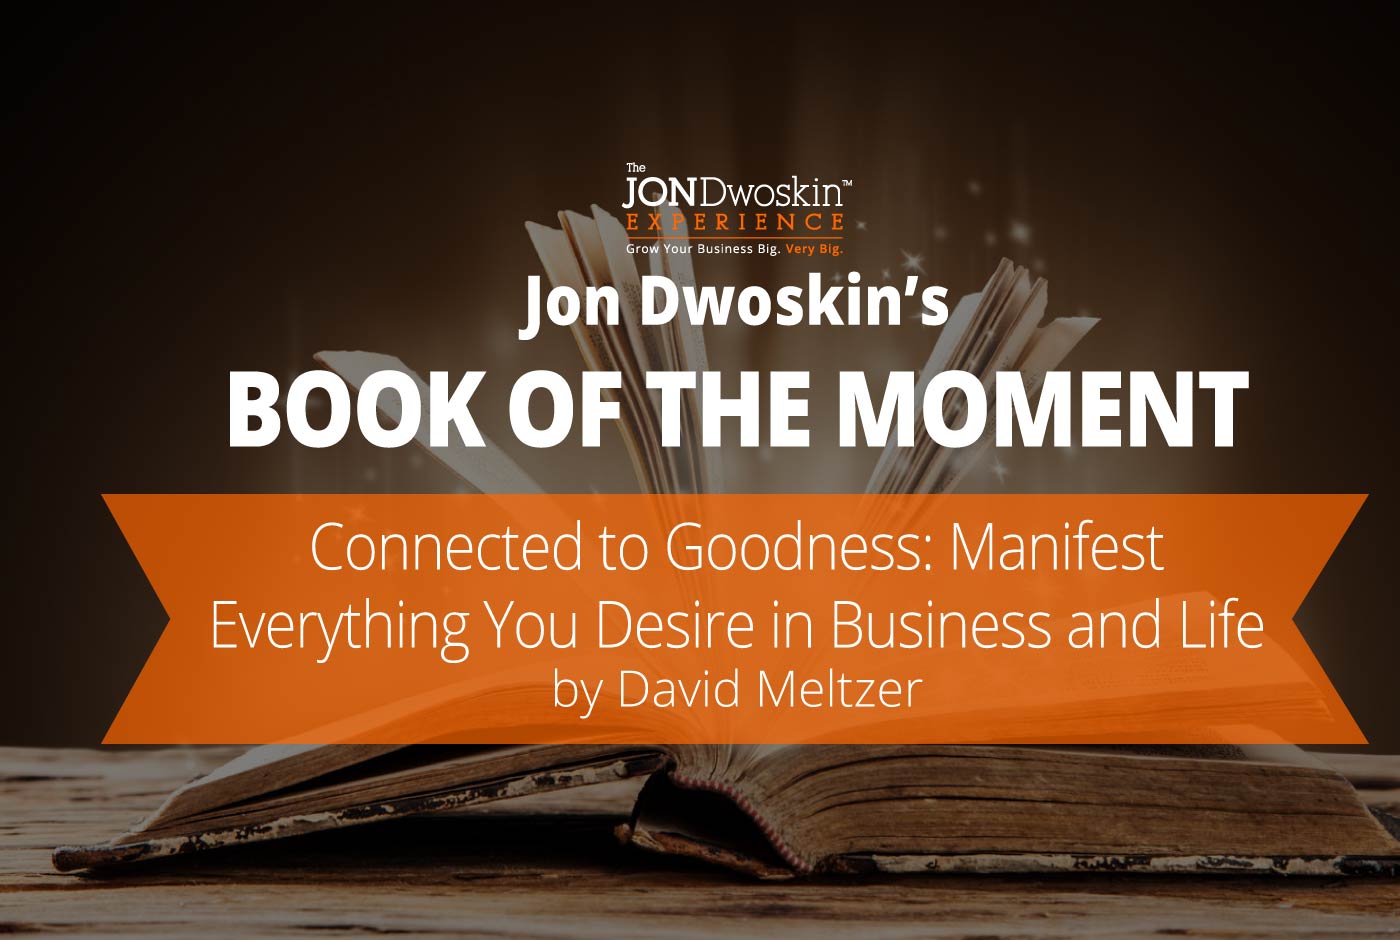 Jon Dwoskin's Book of the Moment